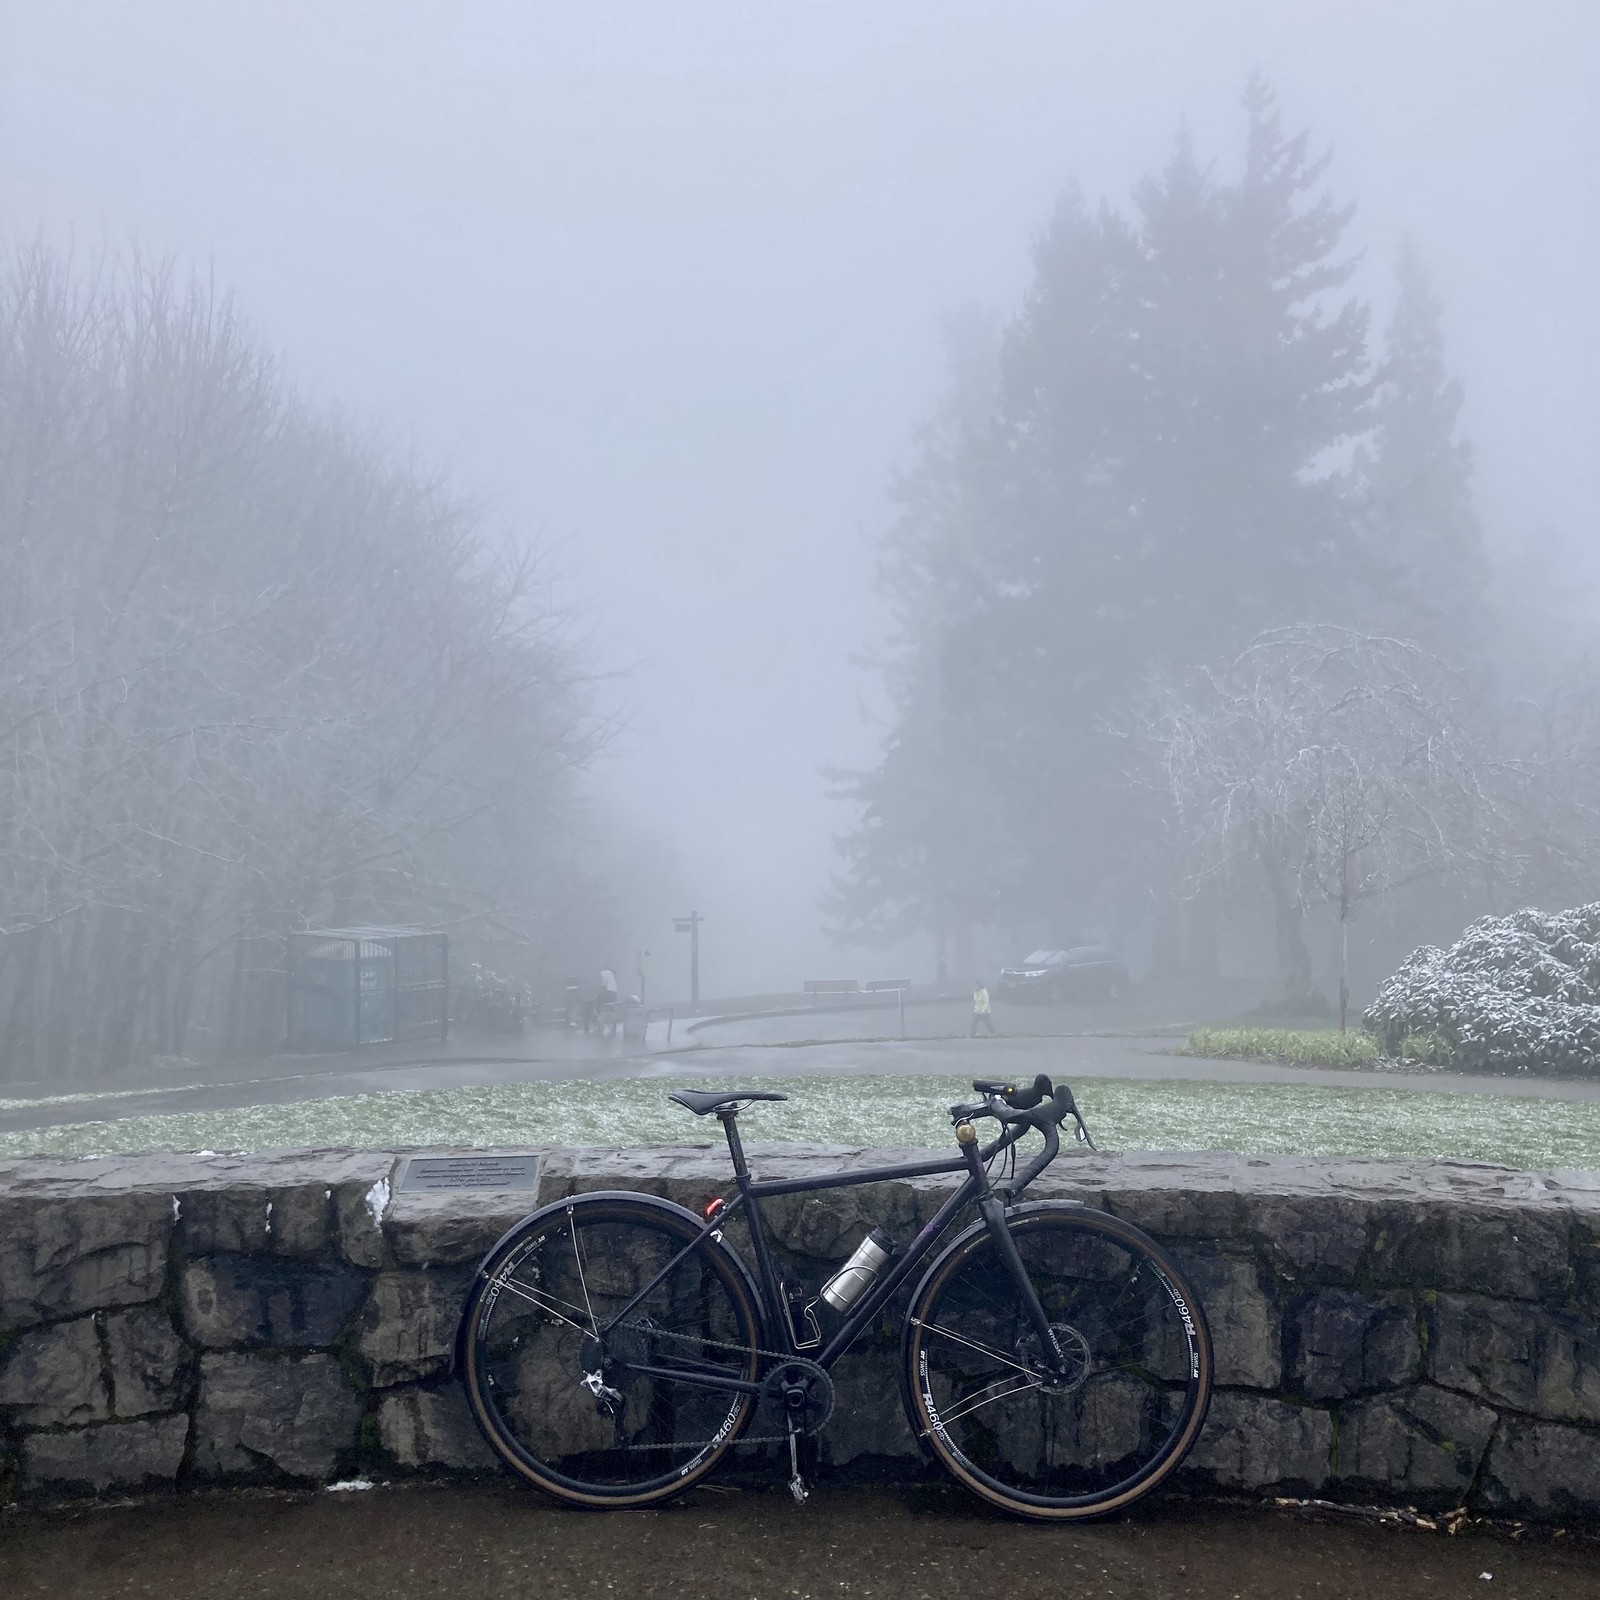 View from Council Crest Park toward Mt. Hood, which is not visible behind a heavy fog that I can only describe as “stationary snow.” In the foreground, a bicycle leans against a low decorative stone wall. Two people and one dog are walking along the parking lot road about 50-100' away.